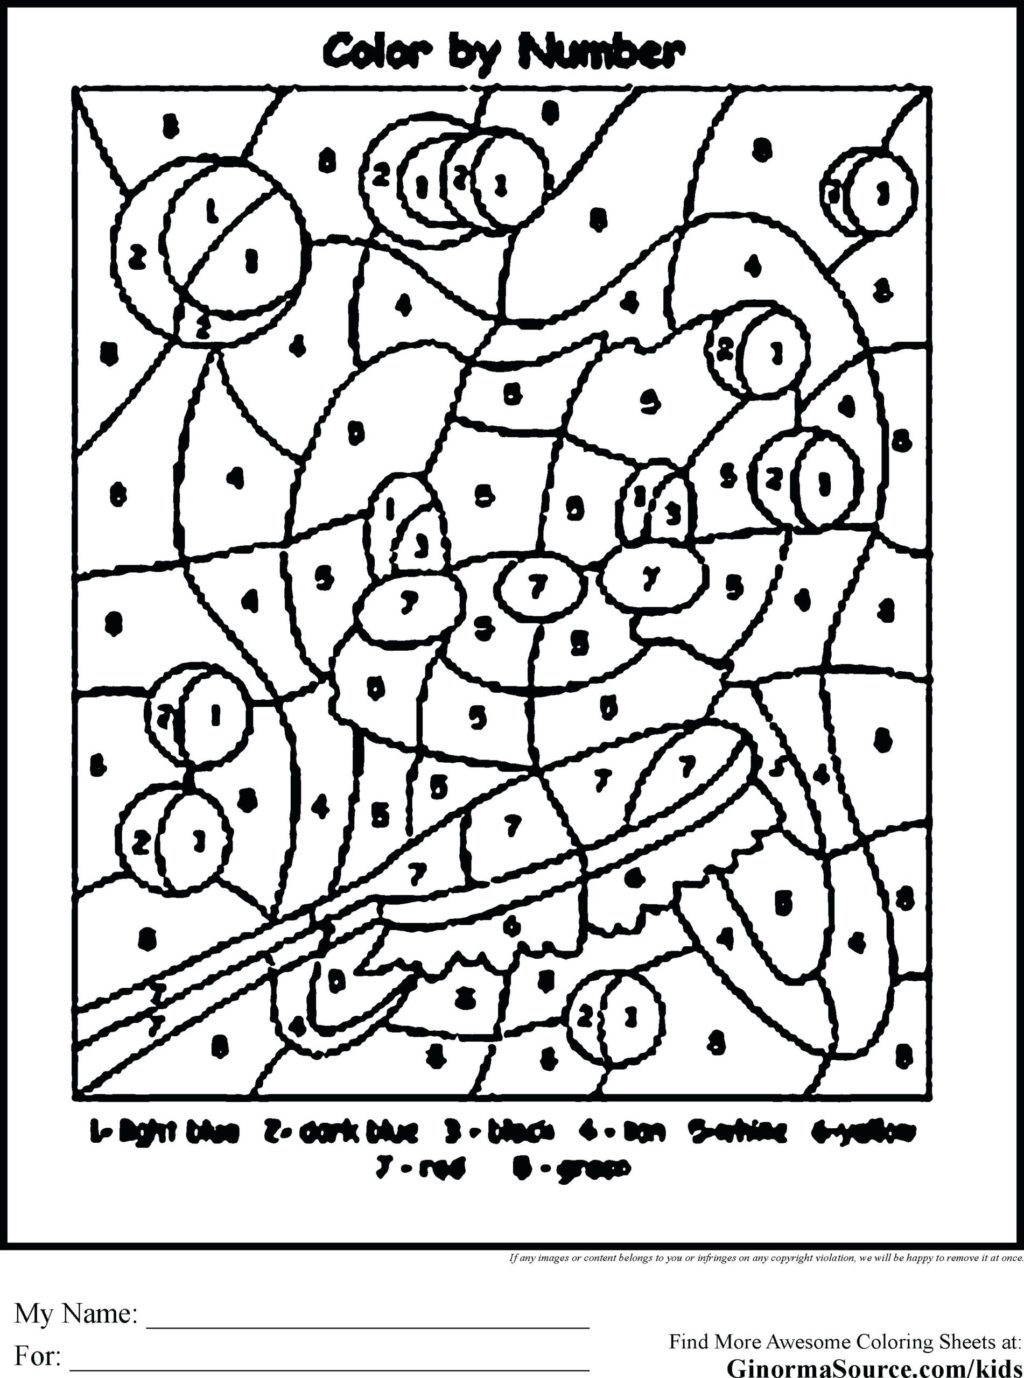 worksheet ~ Coloring Pages Free Printableor By Number For Adults New  Worksheetour Math Book Pdf Printables Pixel Online Colour By Number Math.  Color By Number Printables For Kids. Colour By Number Math